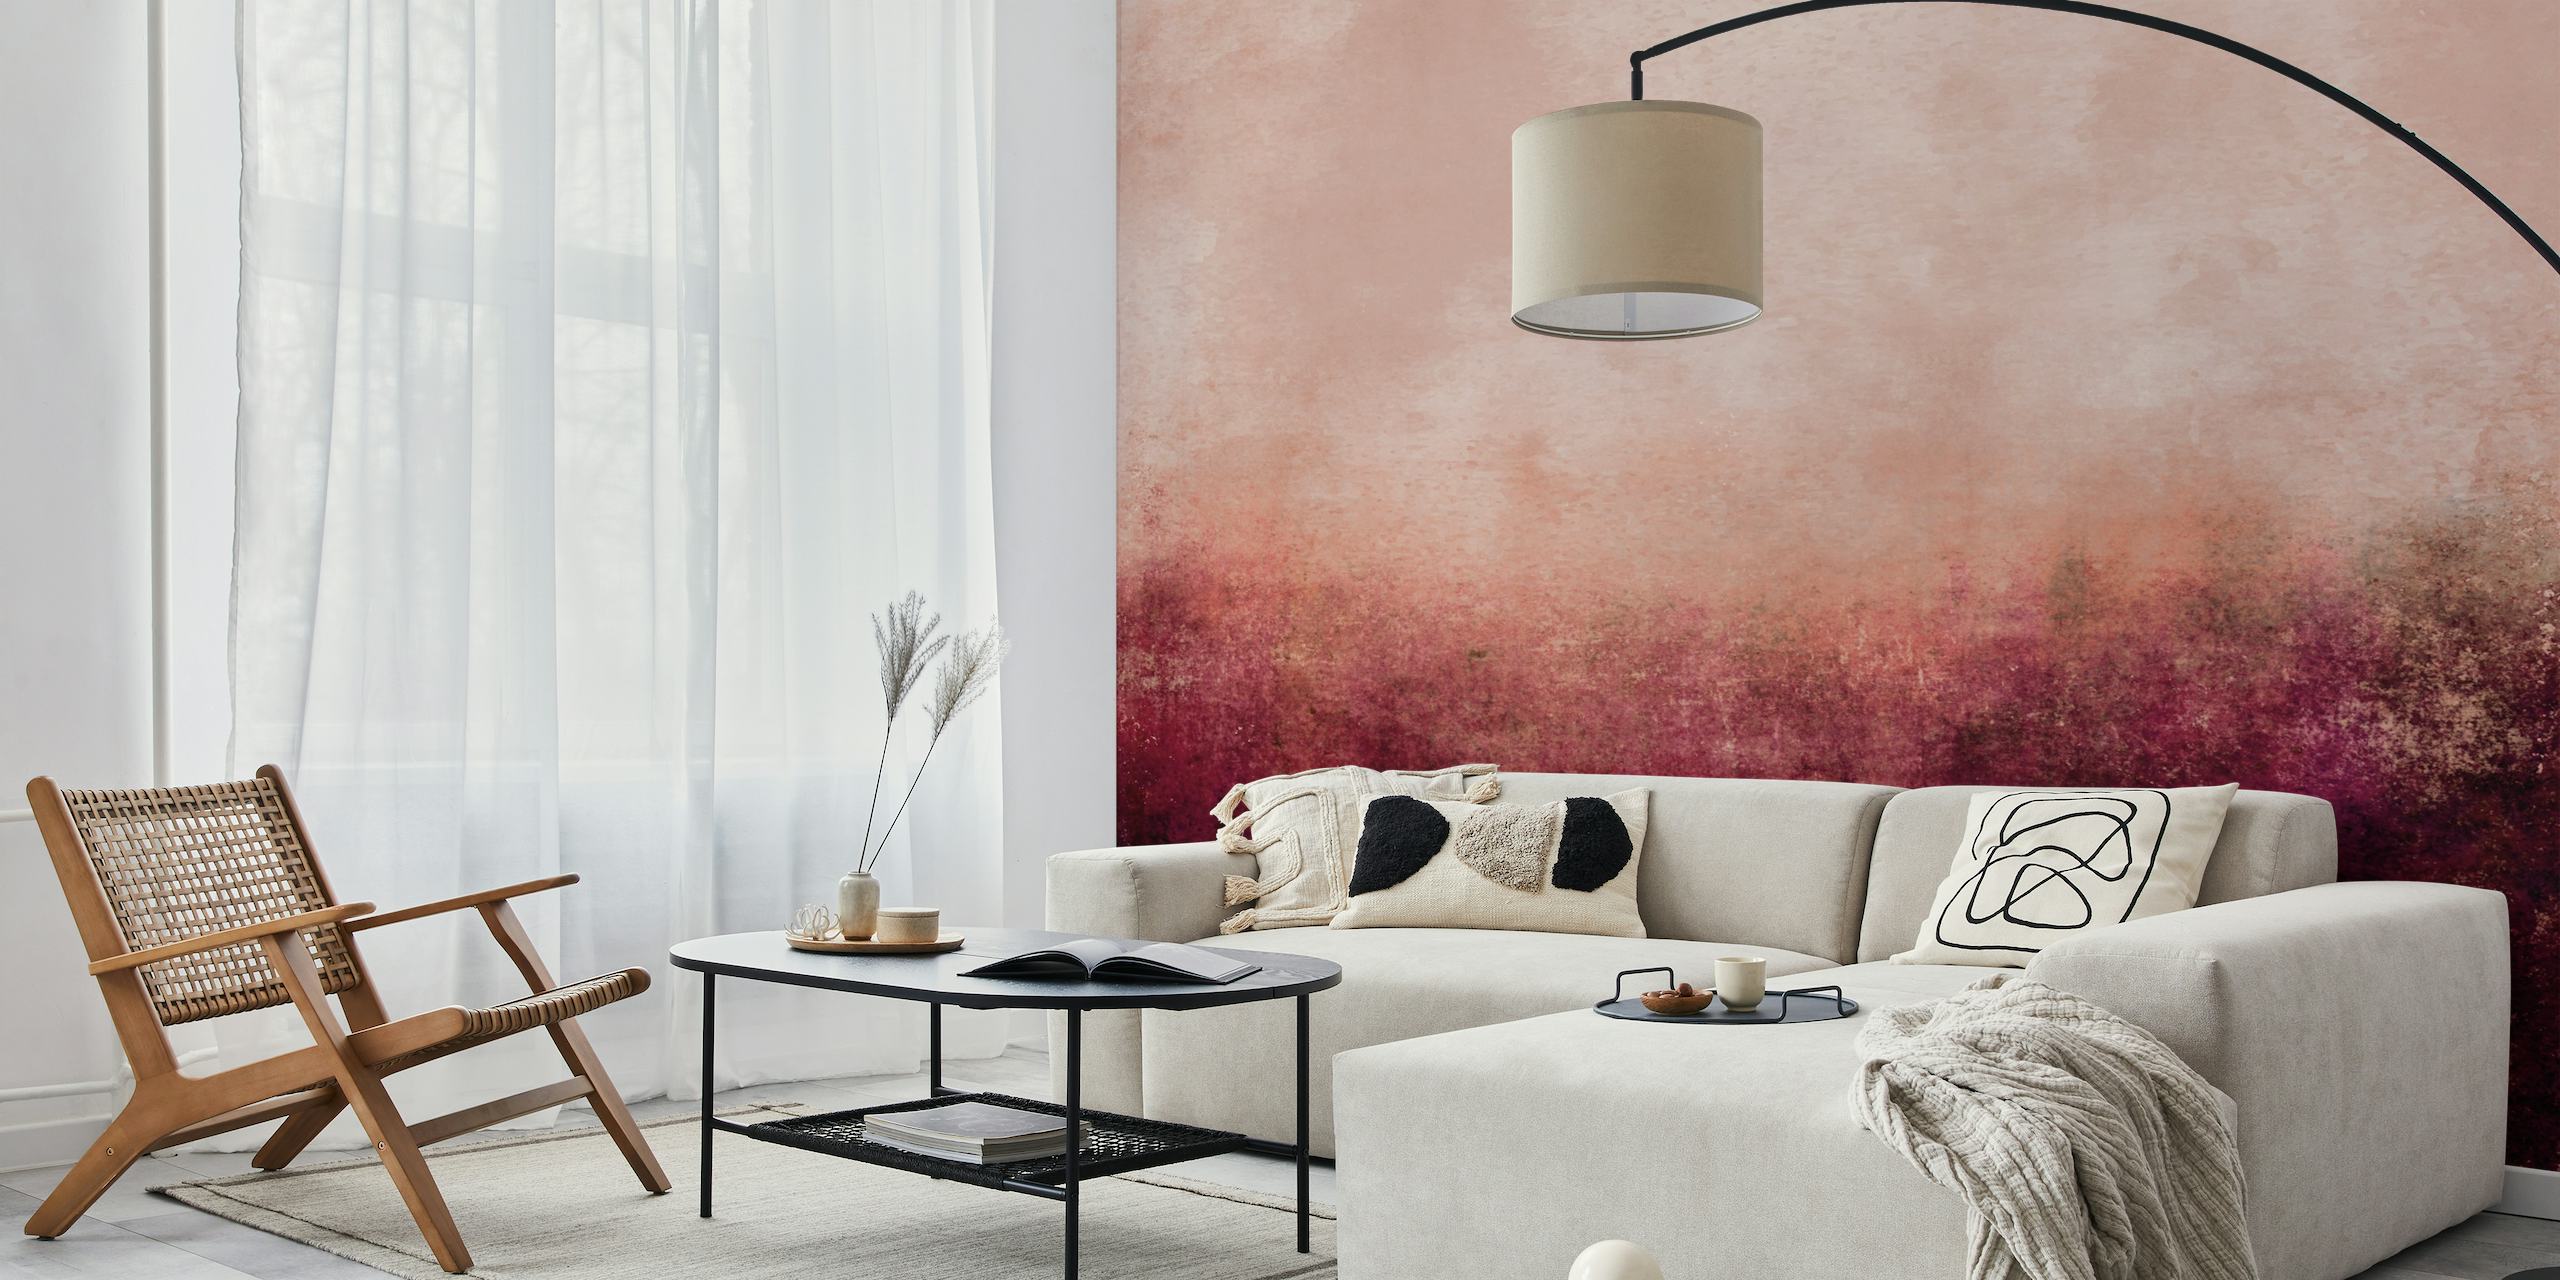 Abstract La Vie en Rose wall mural with a gradient from pink to deep red hues